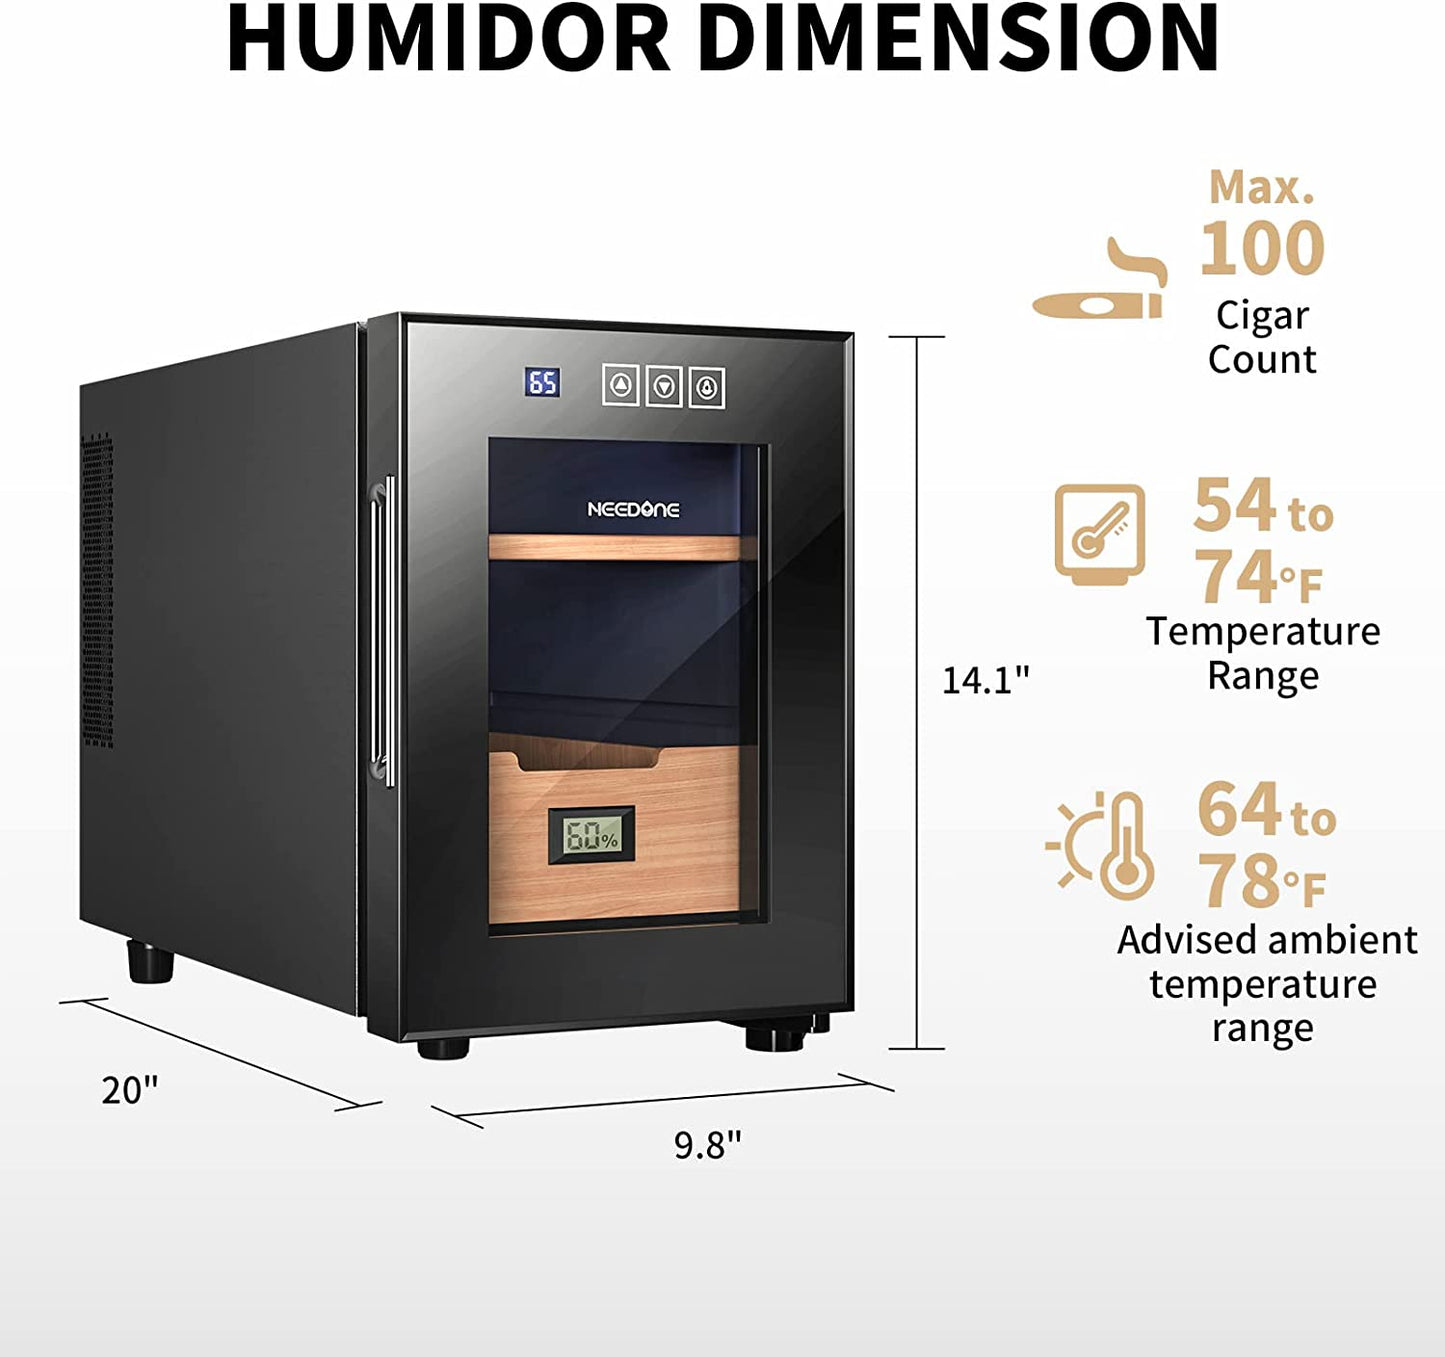 Humidor 16L, Electric Cooler Humidors for 100 Counts, Electronic Cabinet with Cooling Control, Spanish Cedar Wood Drawer Shelves, Digital Hygrometer Displays, Gift for Men